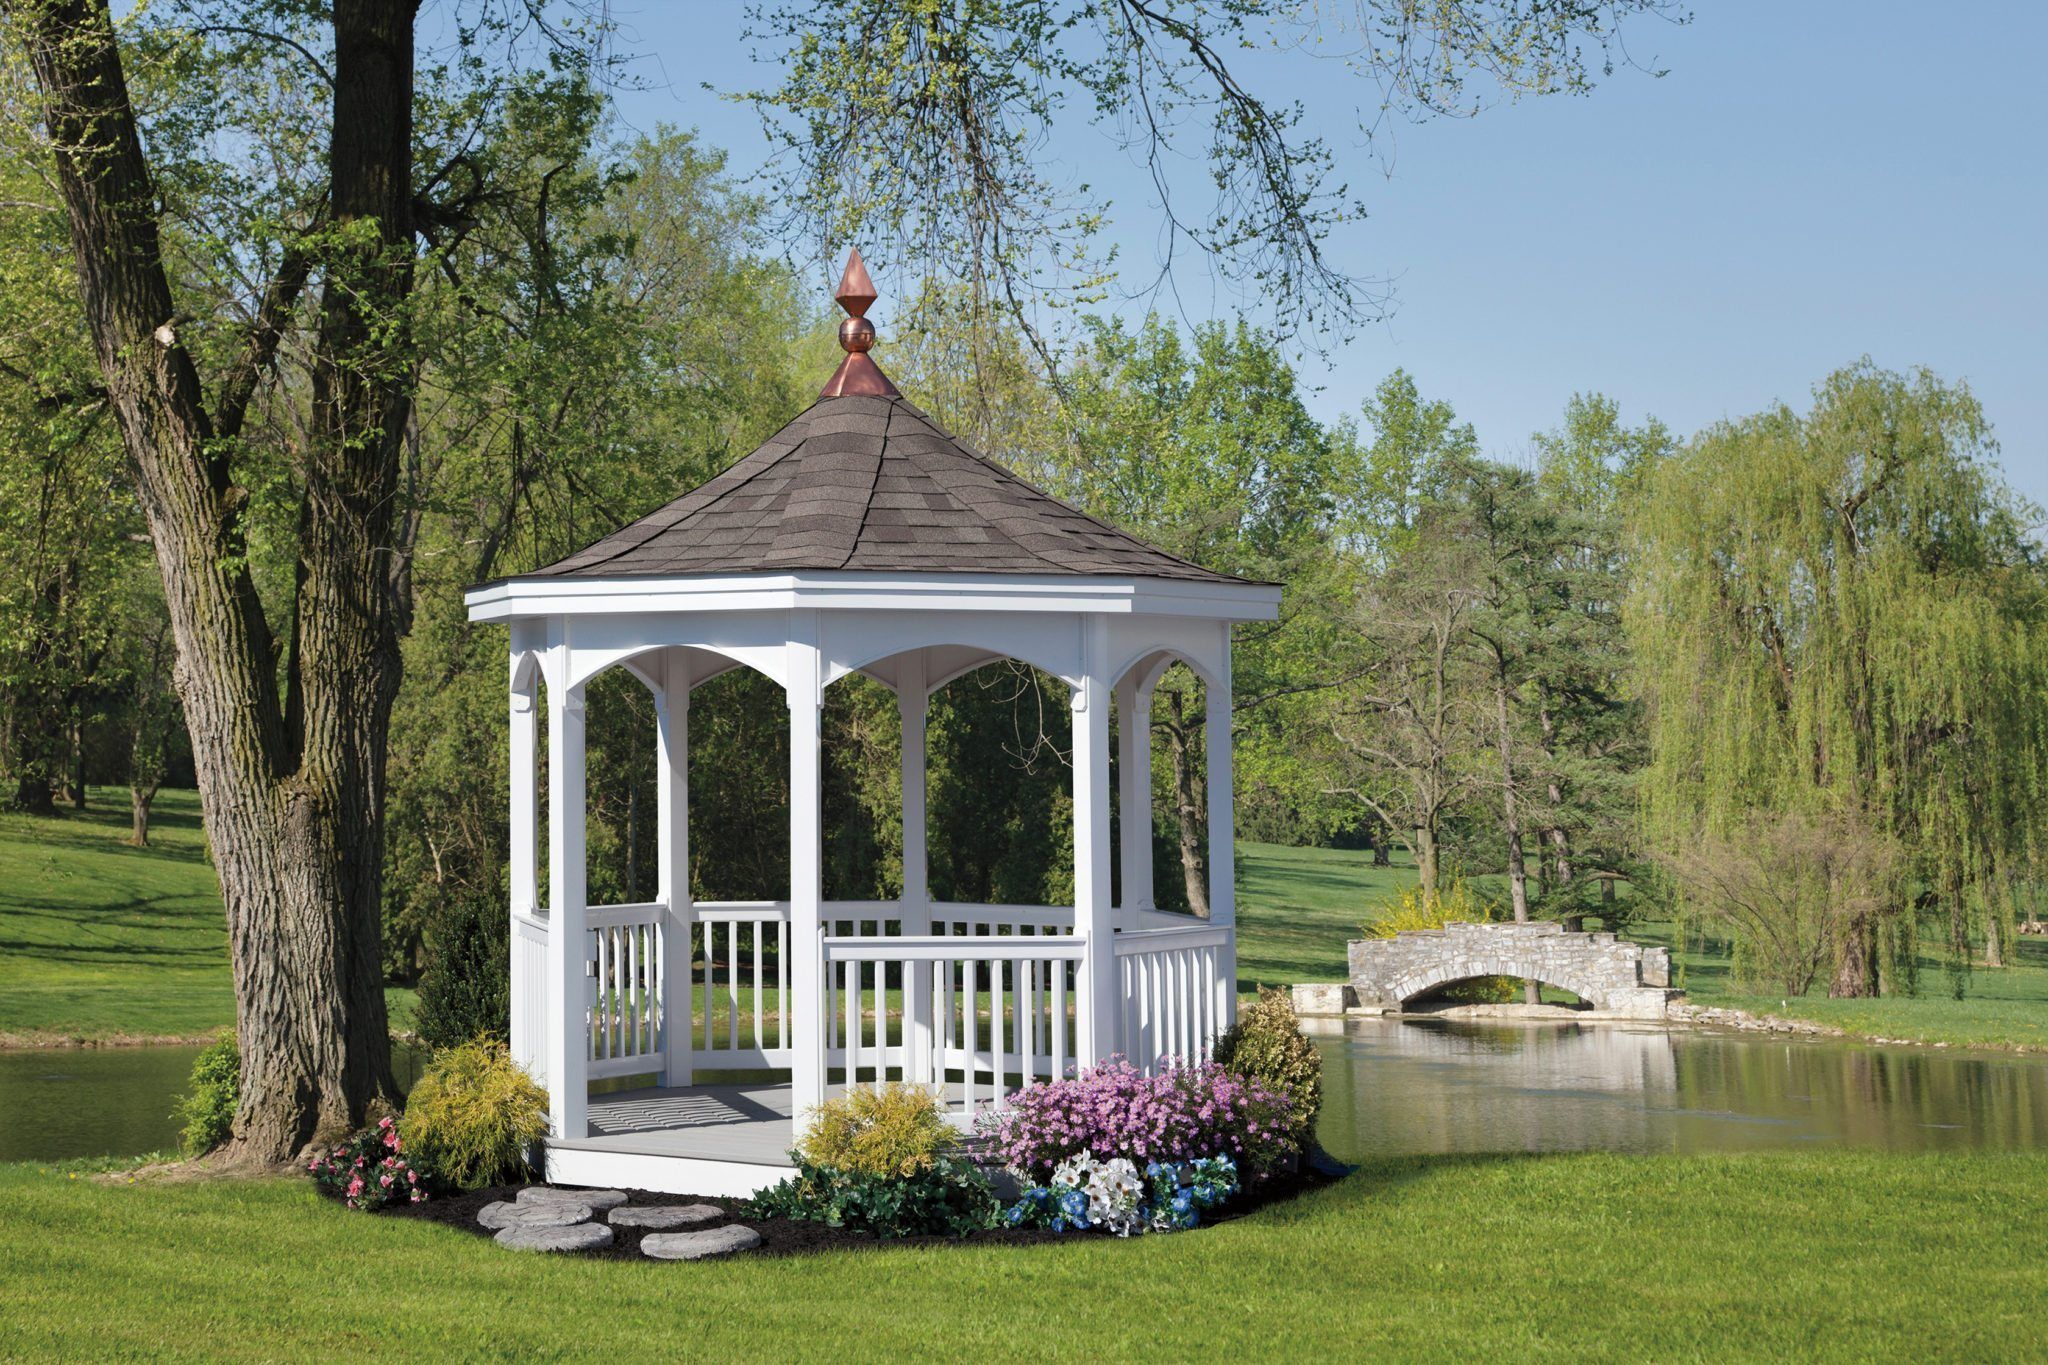 Charming White Gazebo: A Perfect Addition to Your Outdoor Space